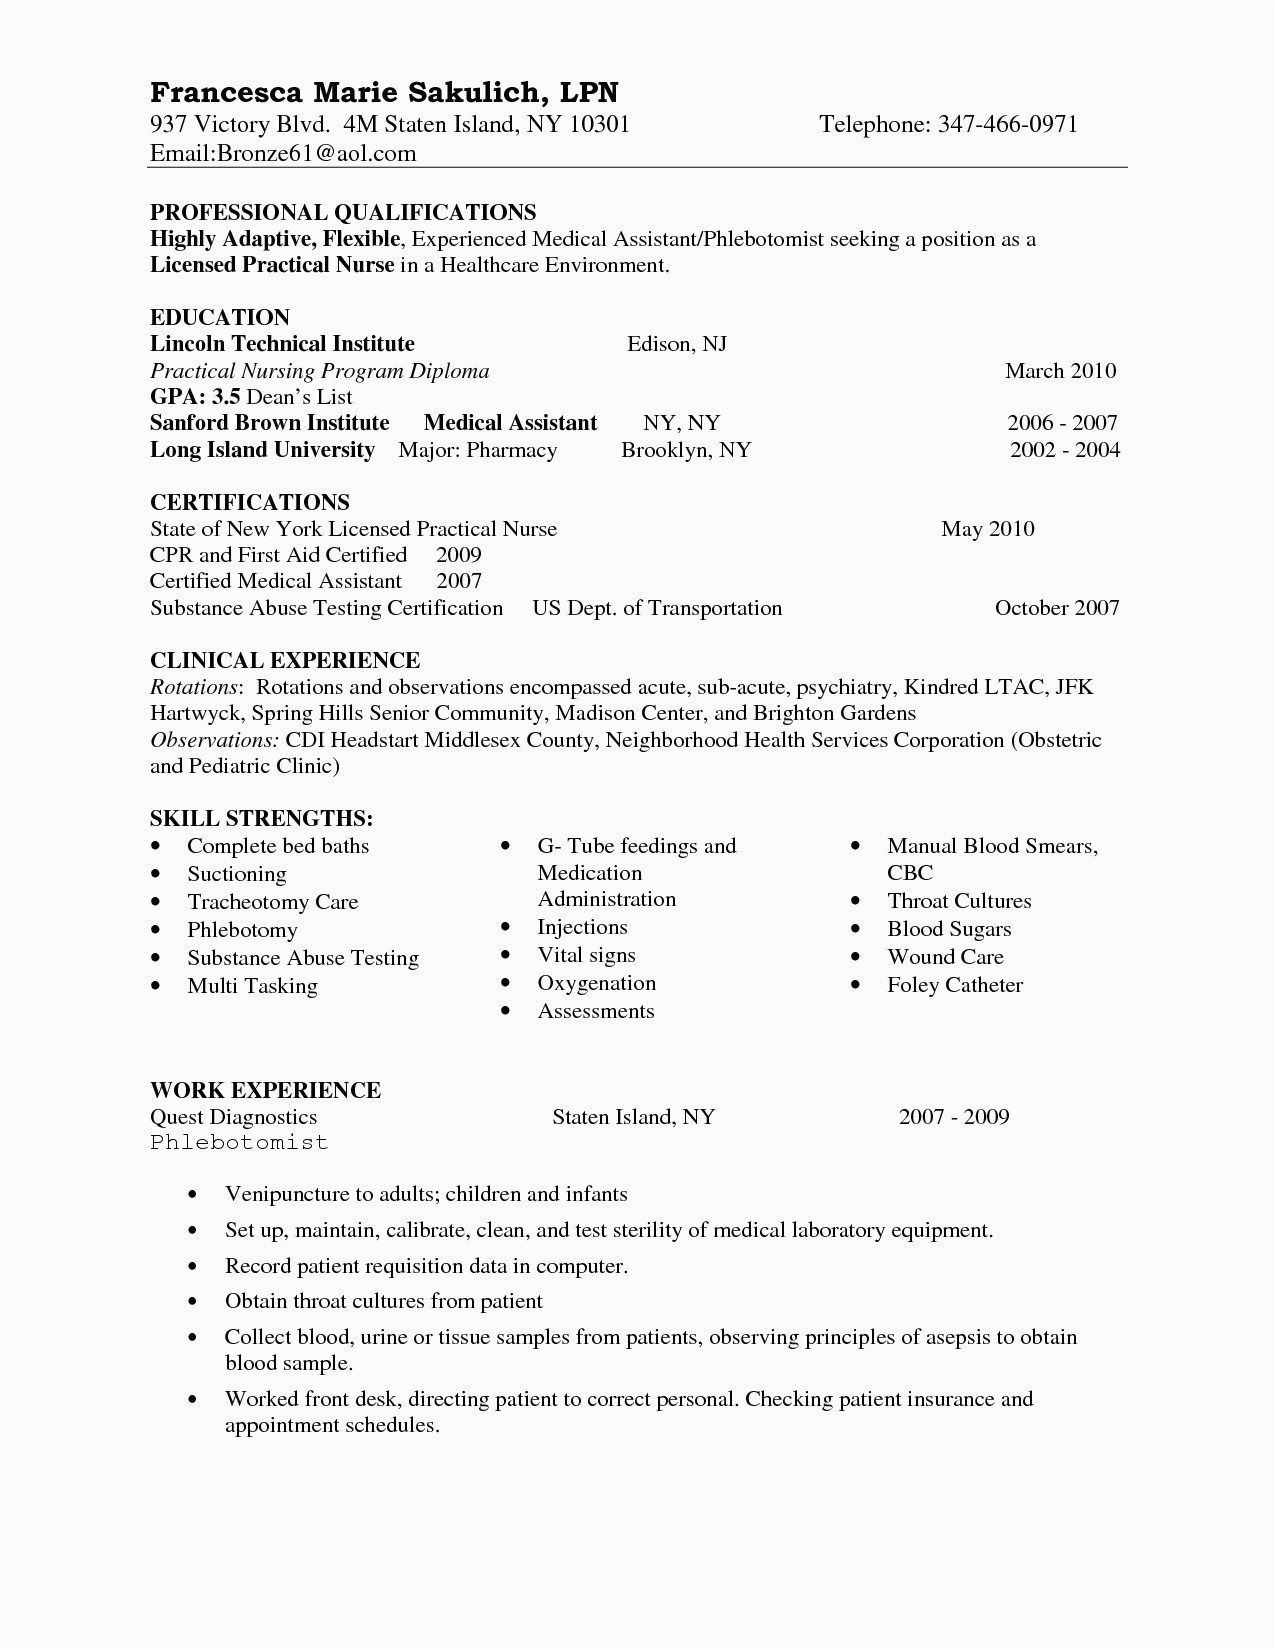 Resume Sample for Recent Graduate with Entry Level Expirience Things to Highlight On A Nurse Resume New Grad